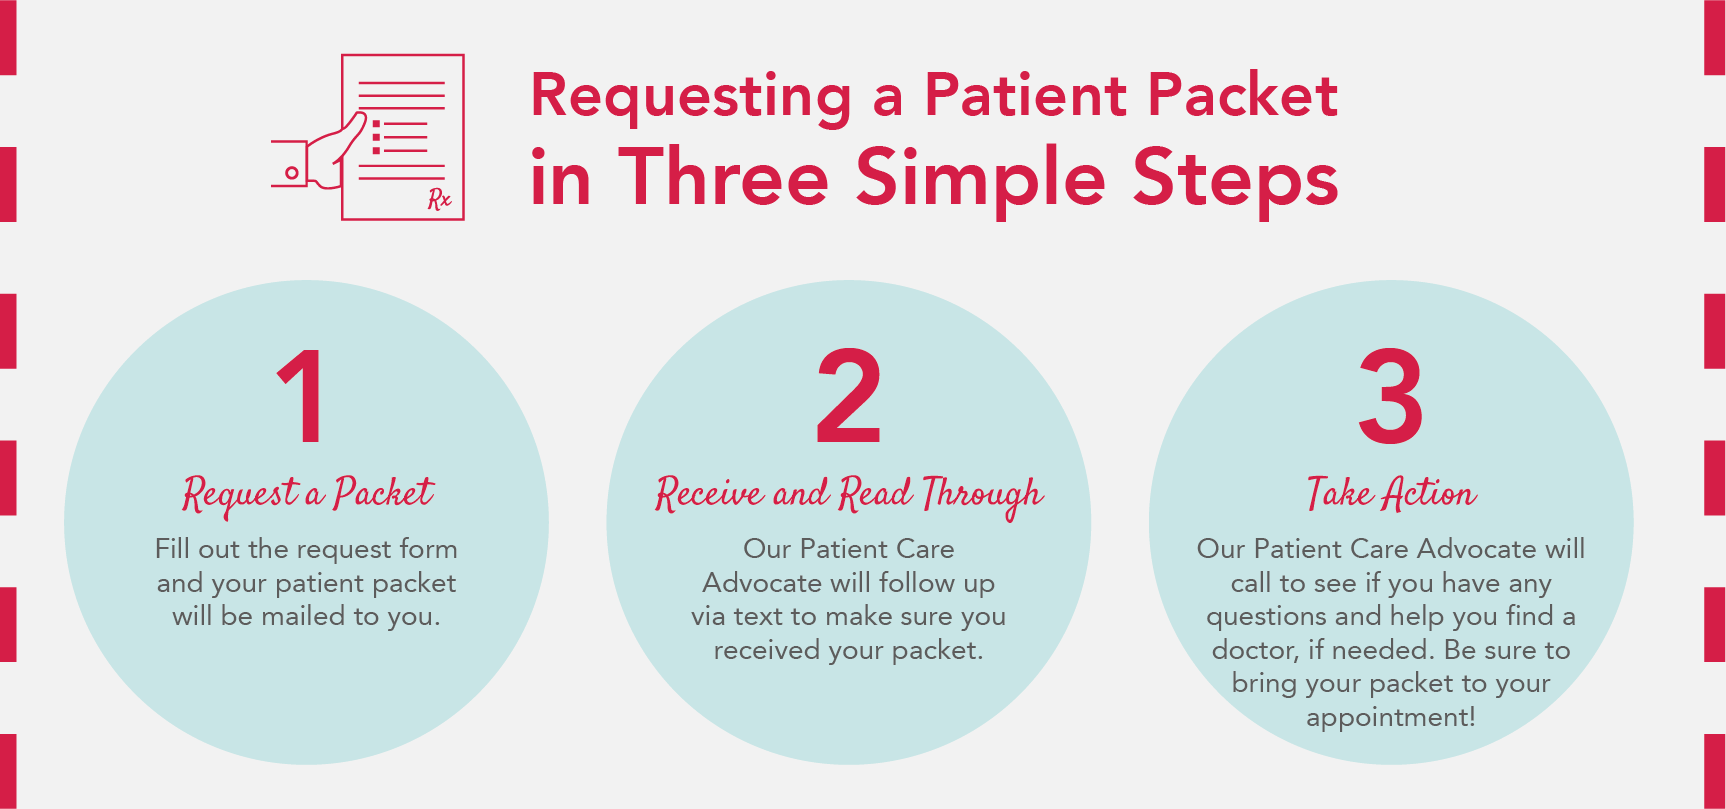 Requesting a patient packet in three simple steps